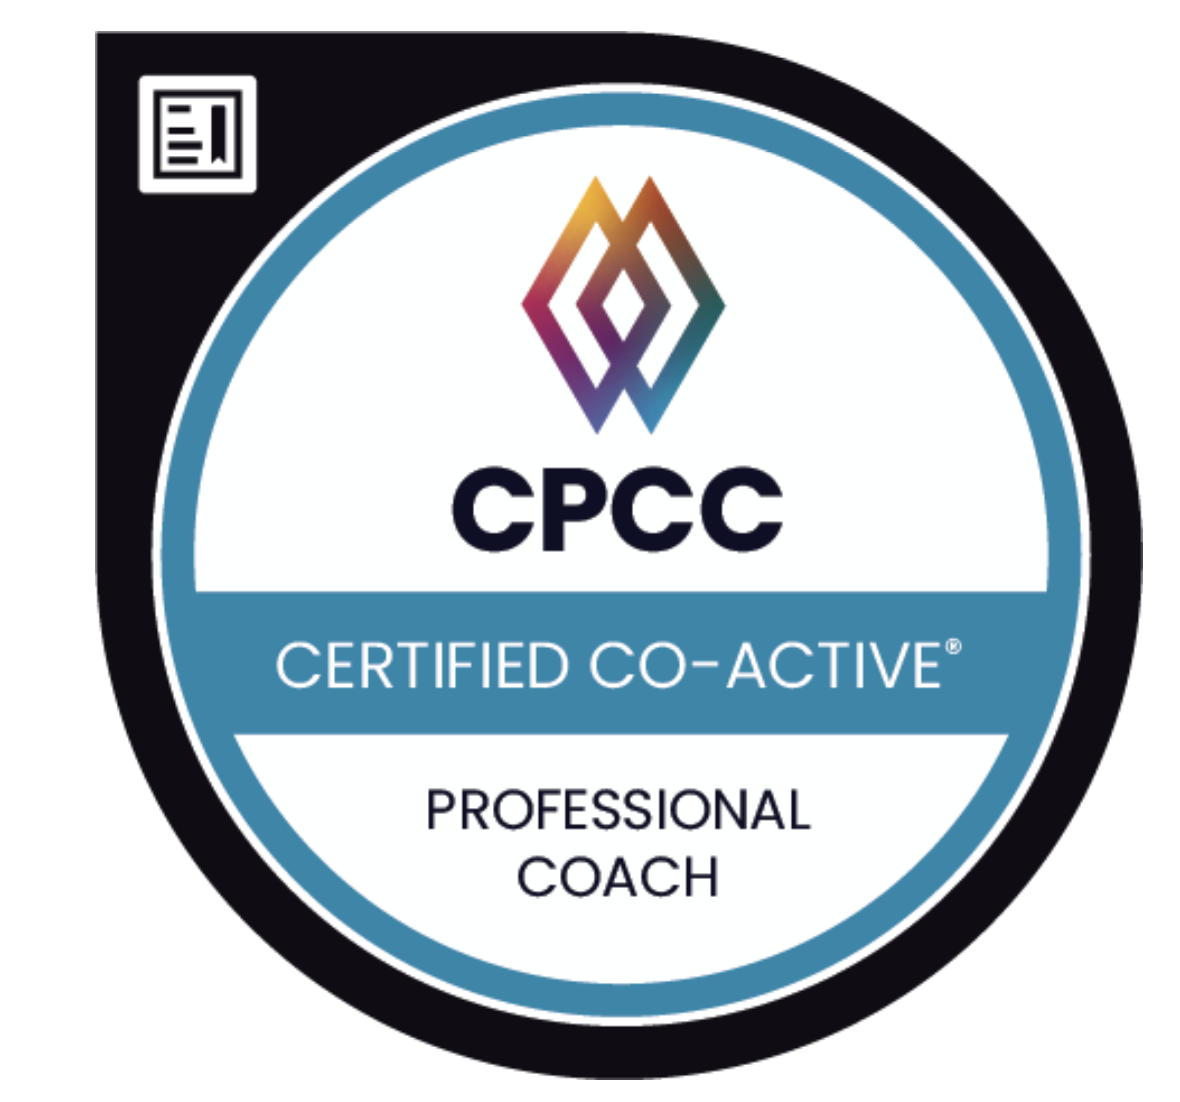 Certified Professional Co-Active Coach (CPCC) credential badge 